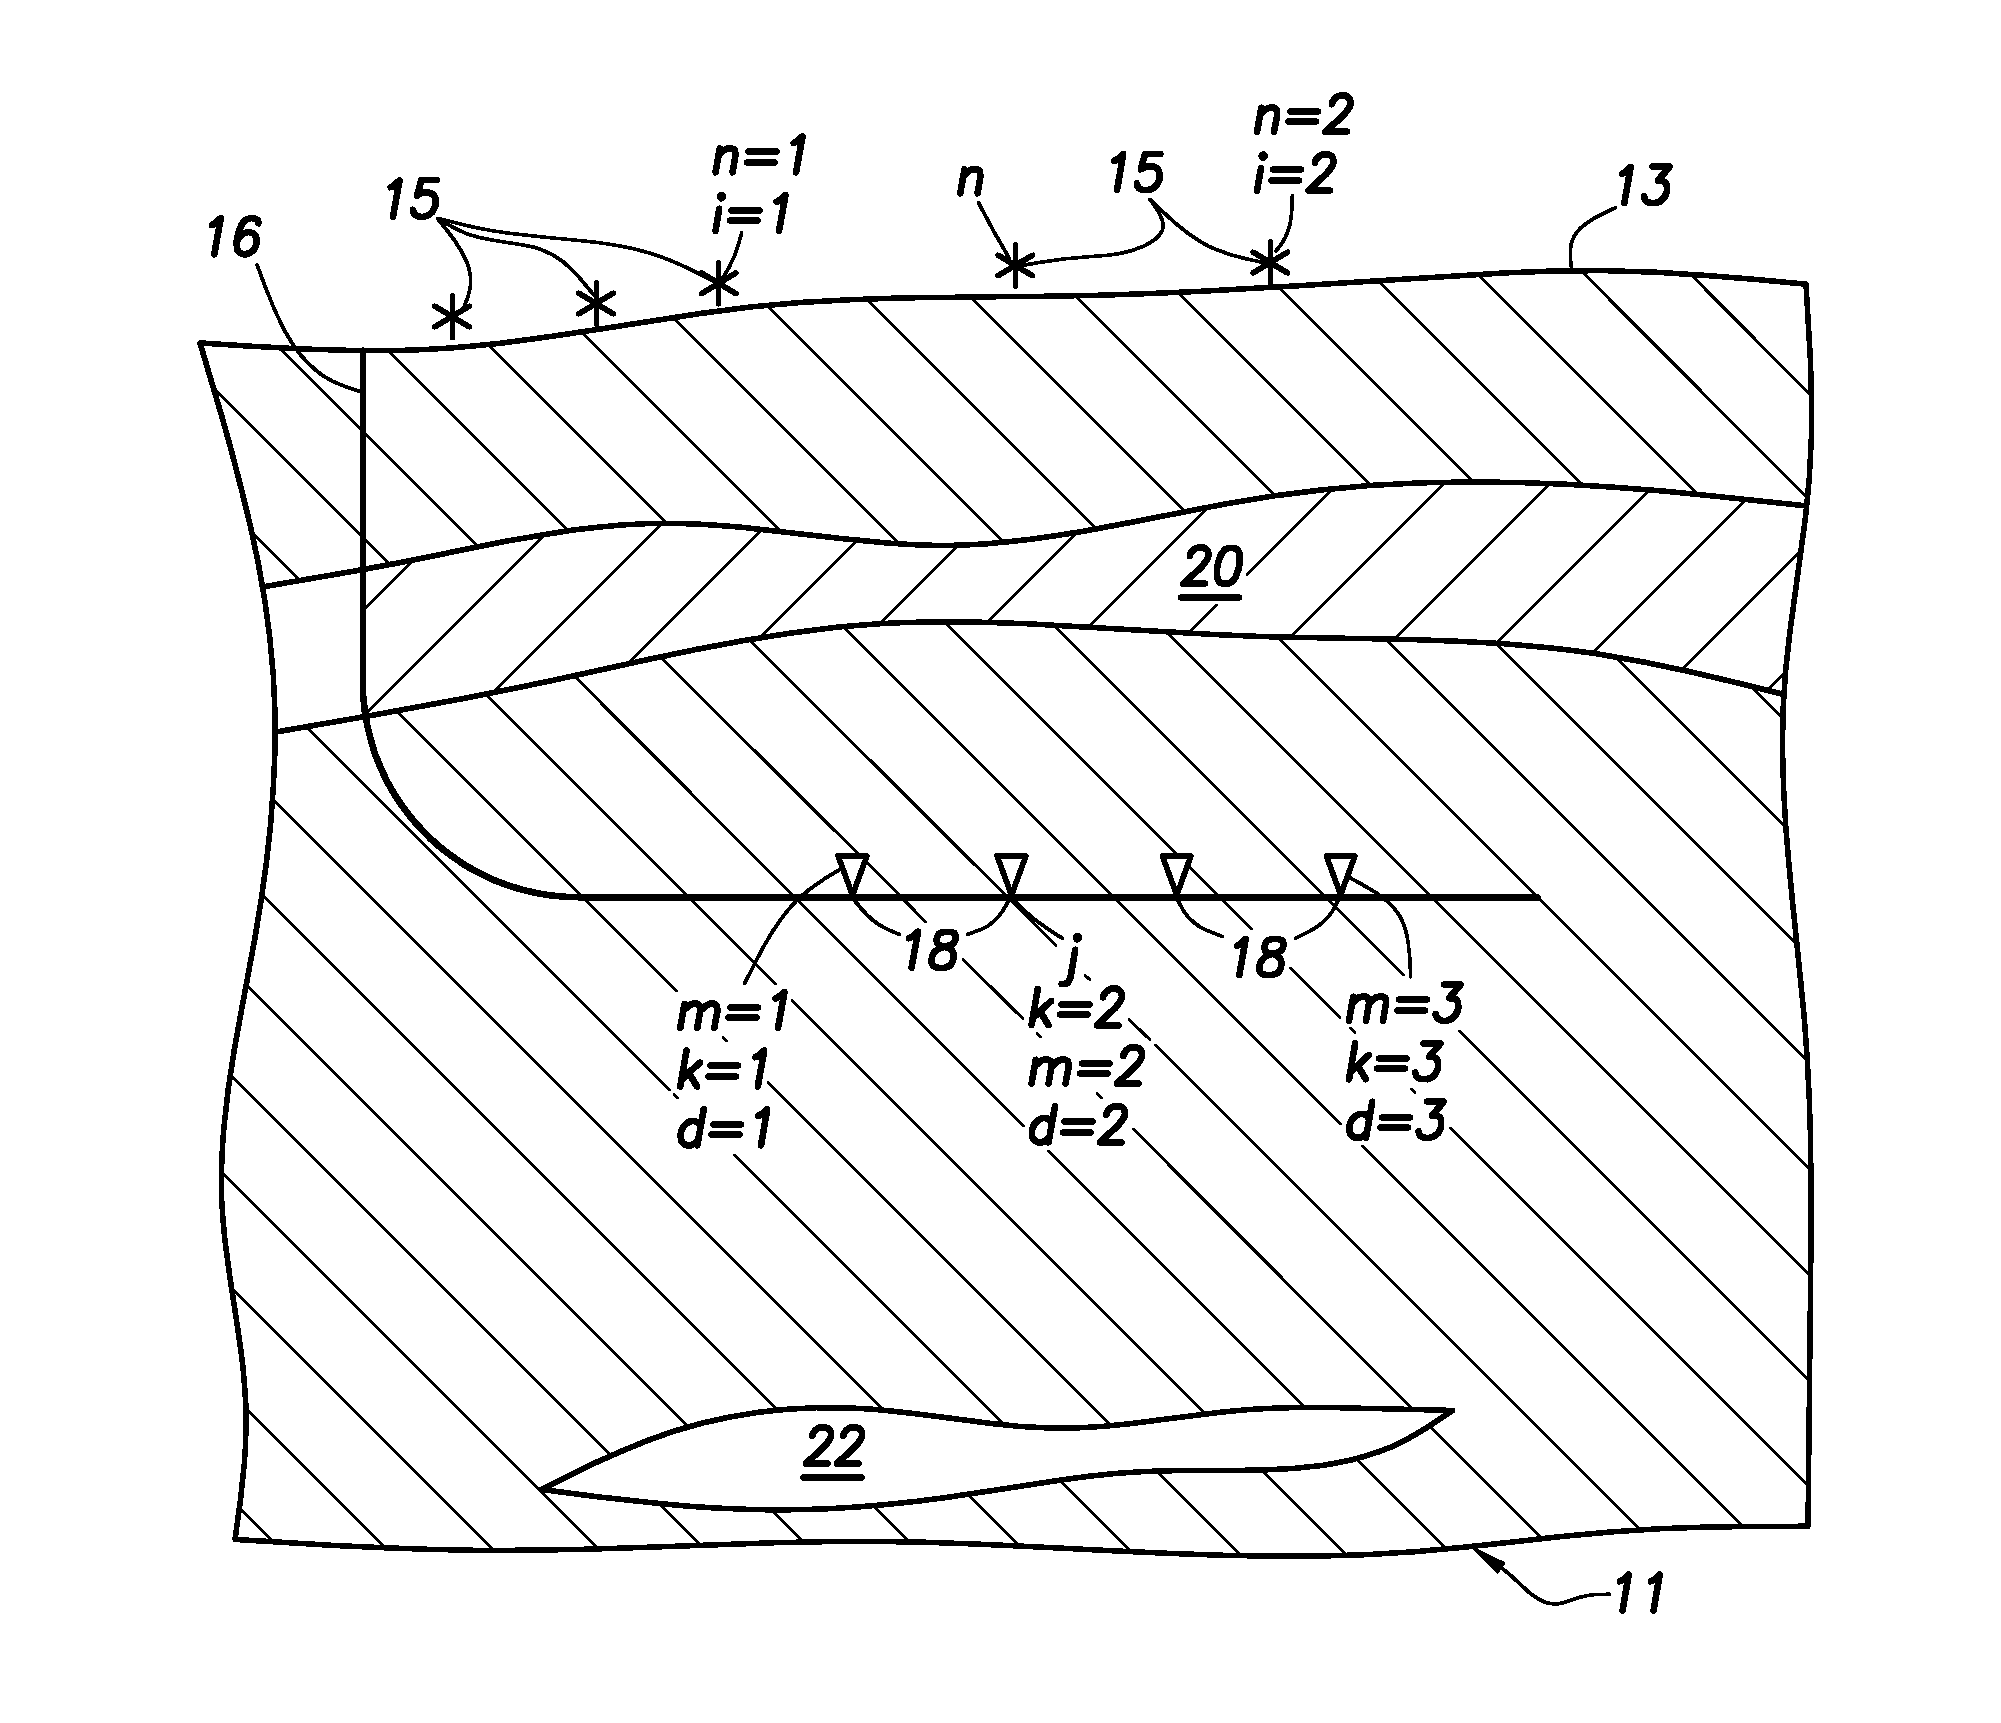 Method of imaging of seismic data involving a virtual source, methods of producing a hydrocarbon fluid, and a computer readable medium